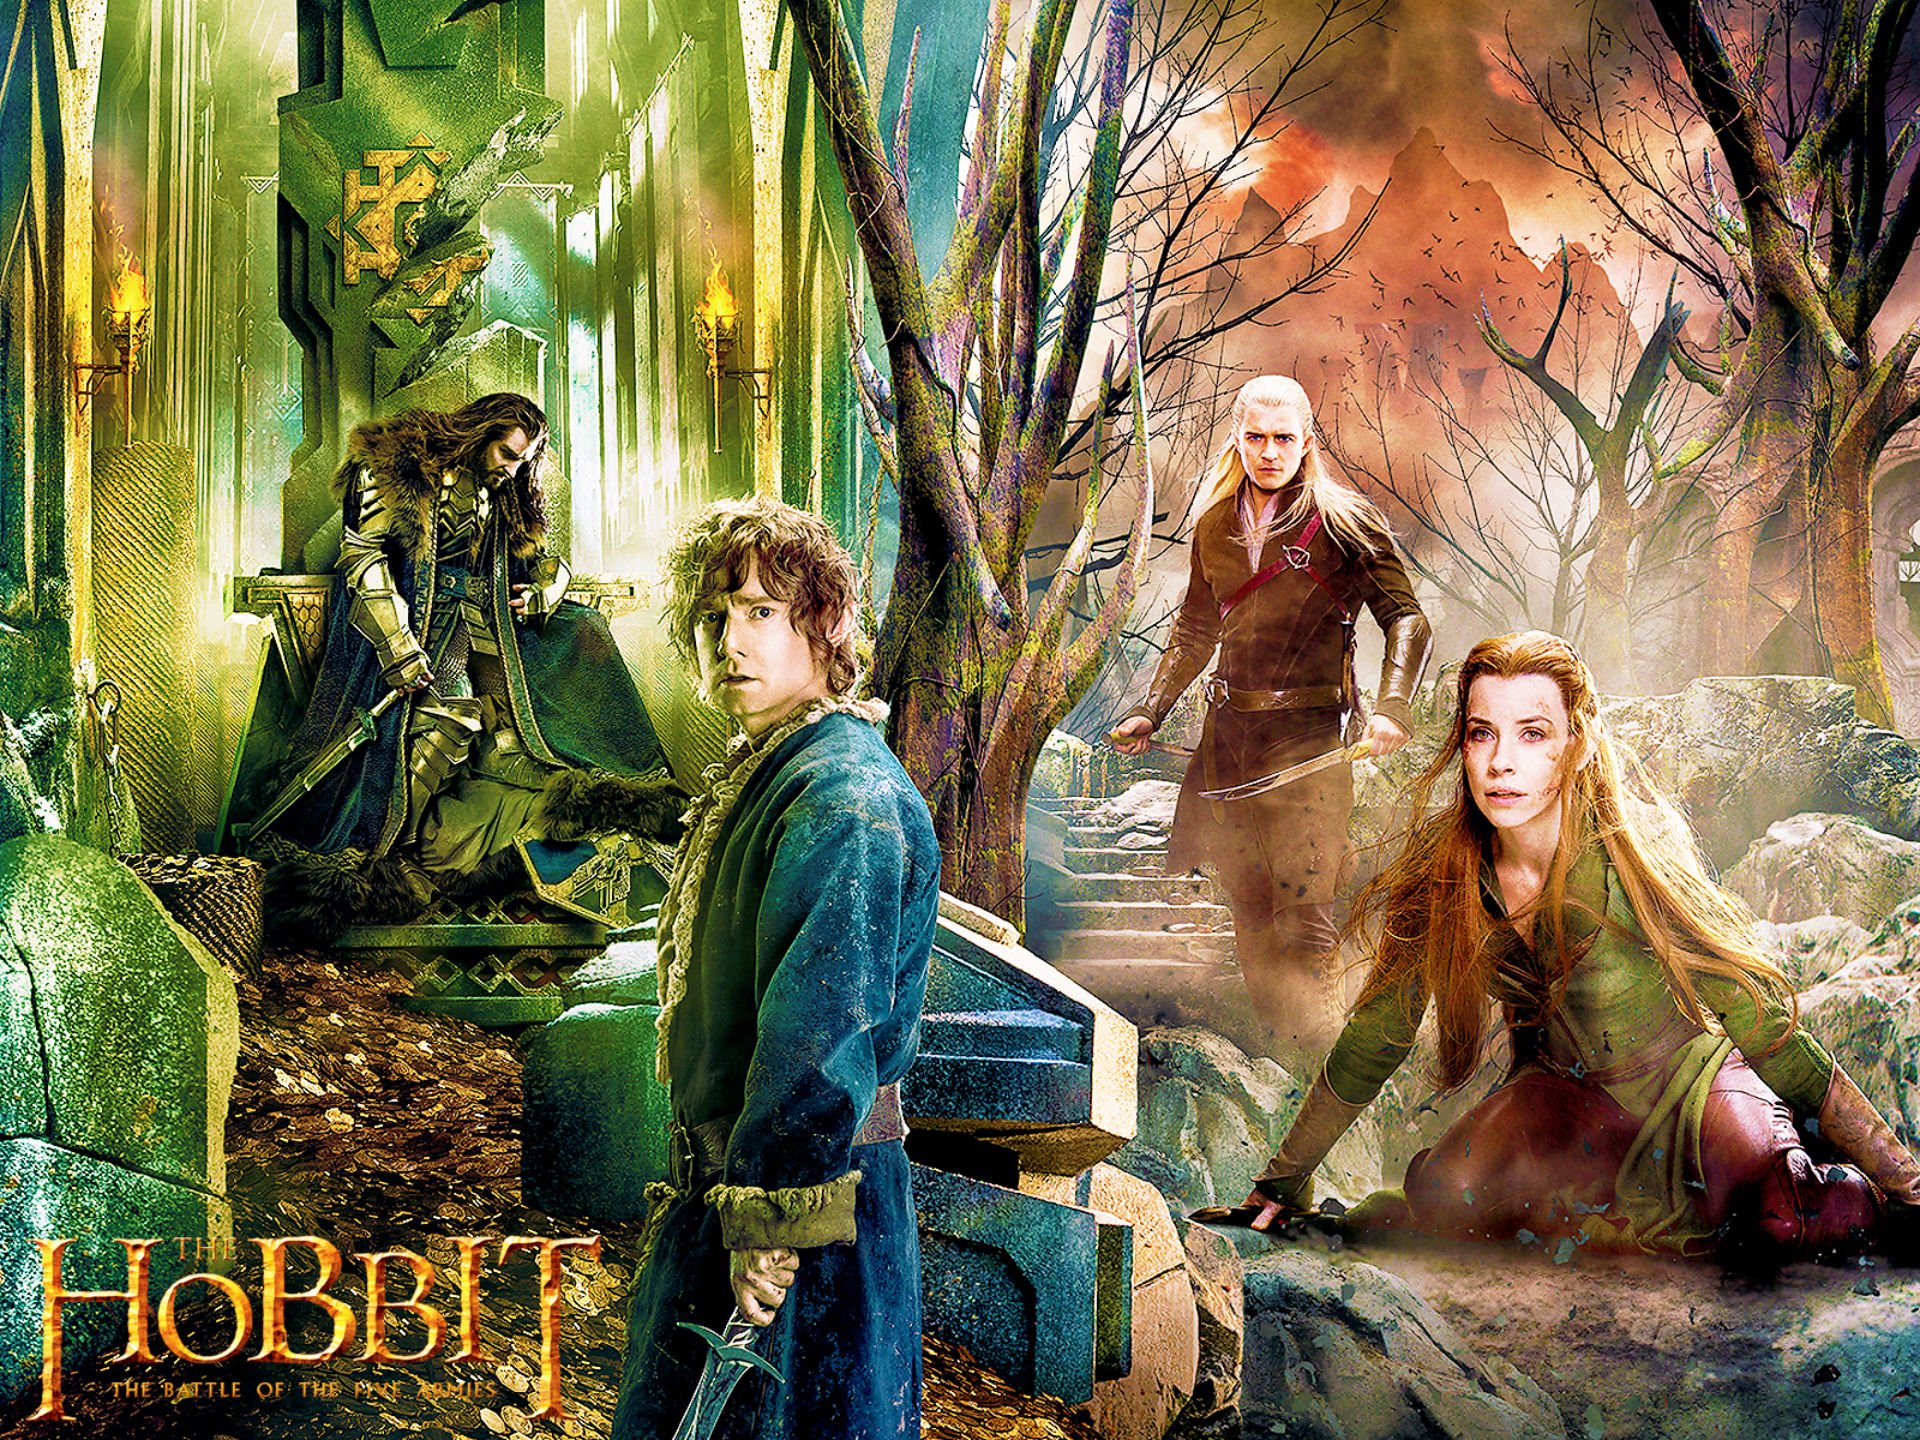 The Hobbit: The Battle of the Five Ar free downloads